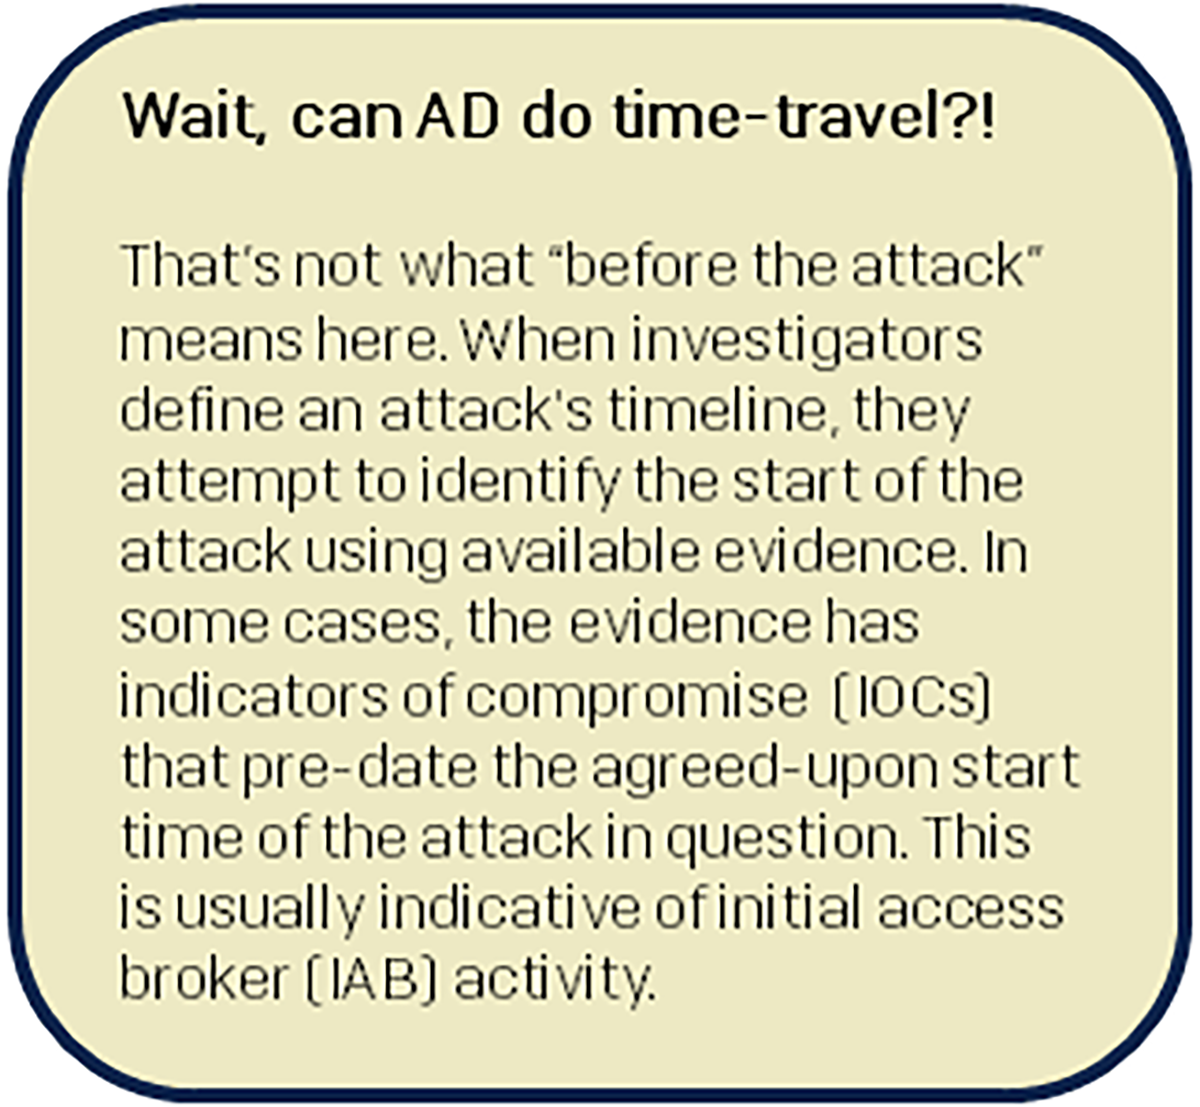 A side that says: That's not what "before the attack" means here. When investigators define an attack's timeline, they attempt to identify the start of the attack using available evidence. In some cases, the evidence has indicators of compromise (IOCs0 that pre-date the agreed-upon start time of the attack in question. This is usually indicative of initial access broker (IAB) activity.